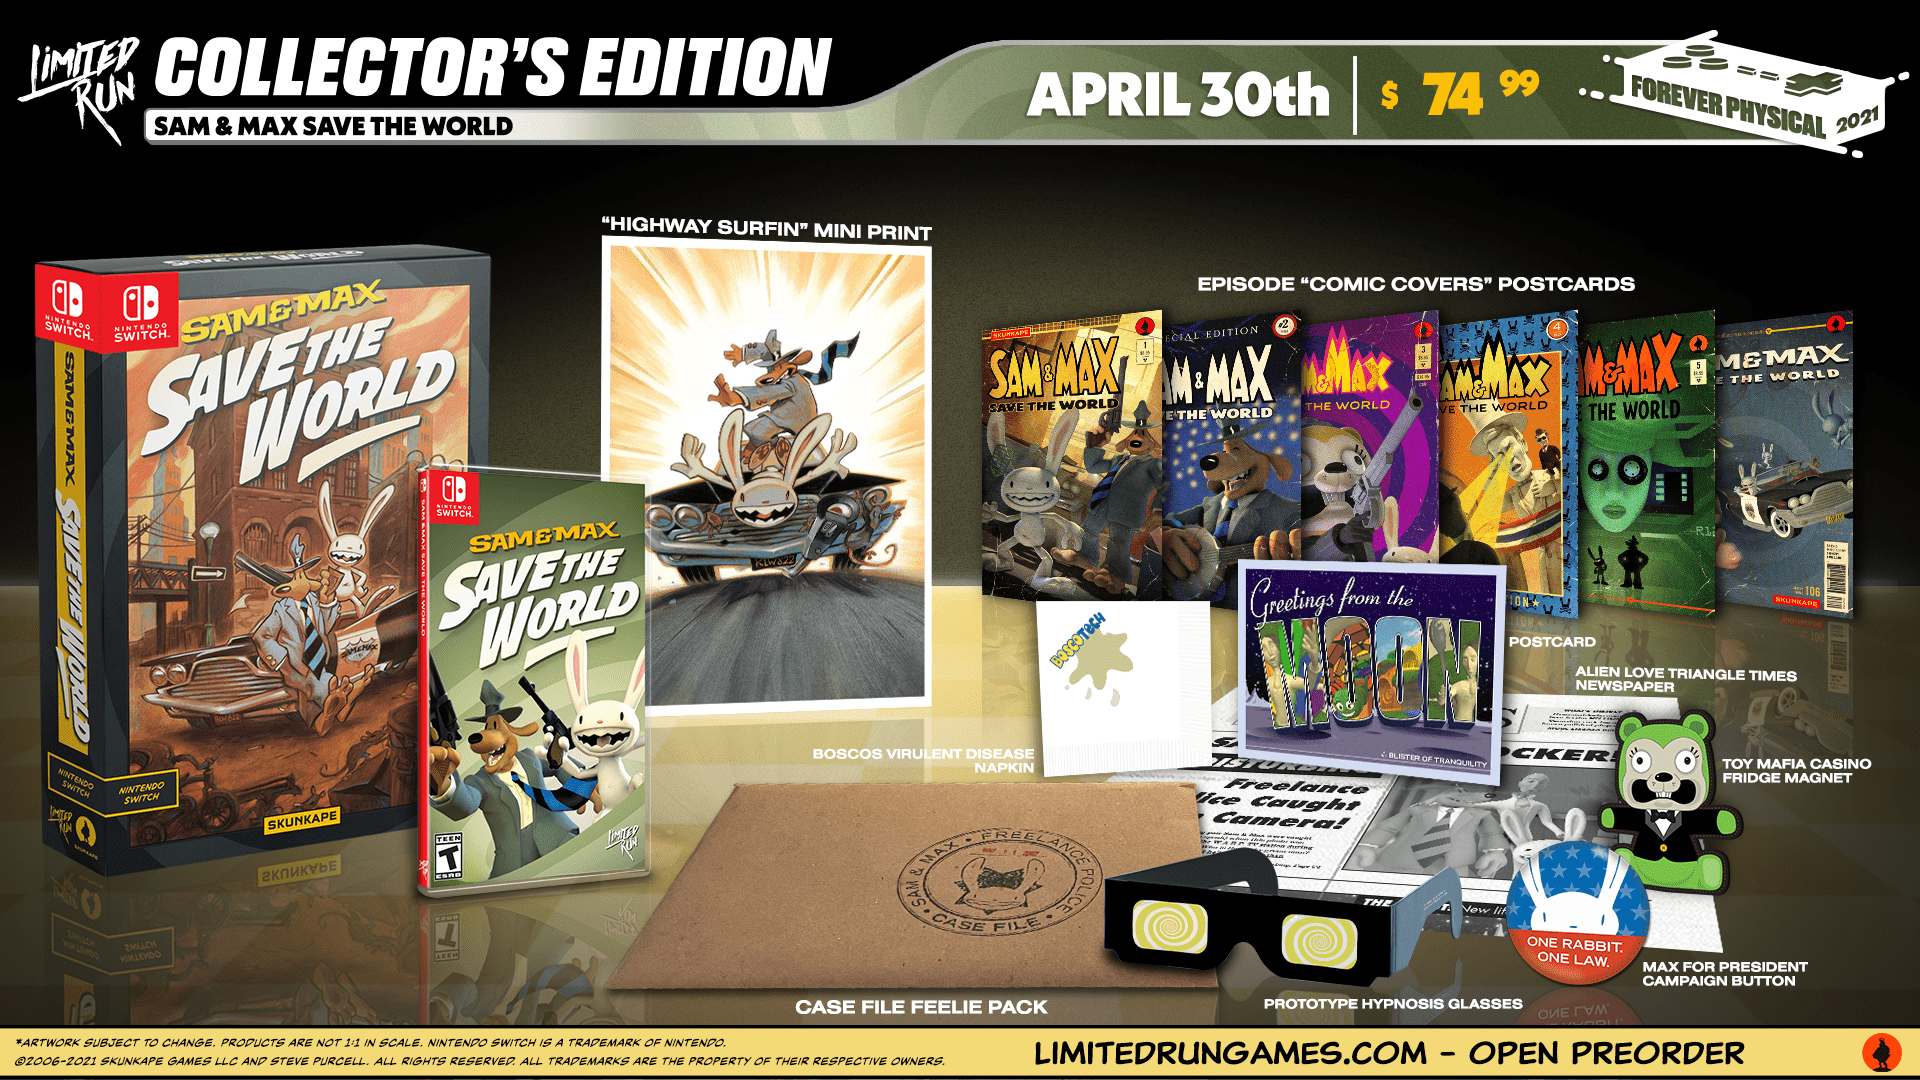 Read more about the article Alright, little buddy: Sam & Max Save the World gets physical Limited Runs for Switch & PC starting Friday, April 30 at 10am ET!